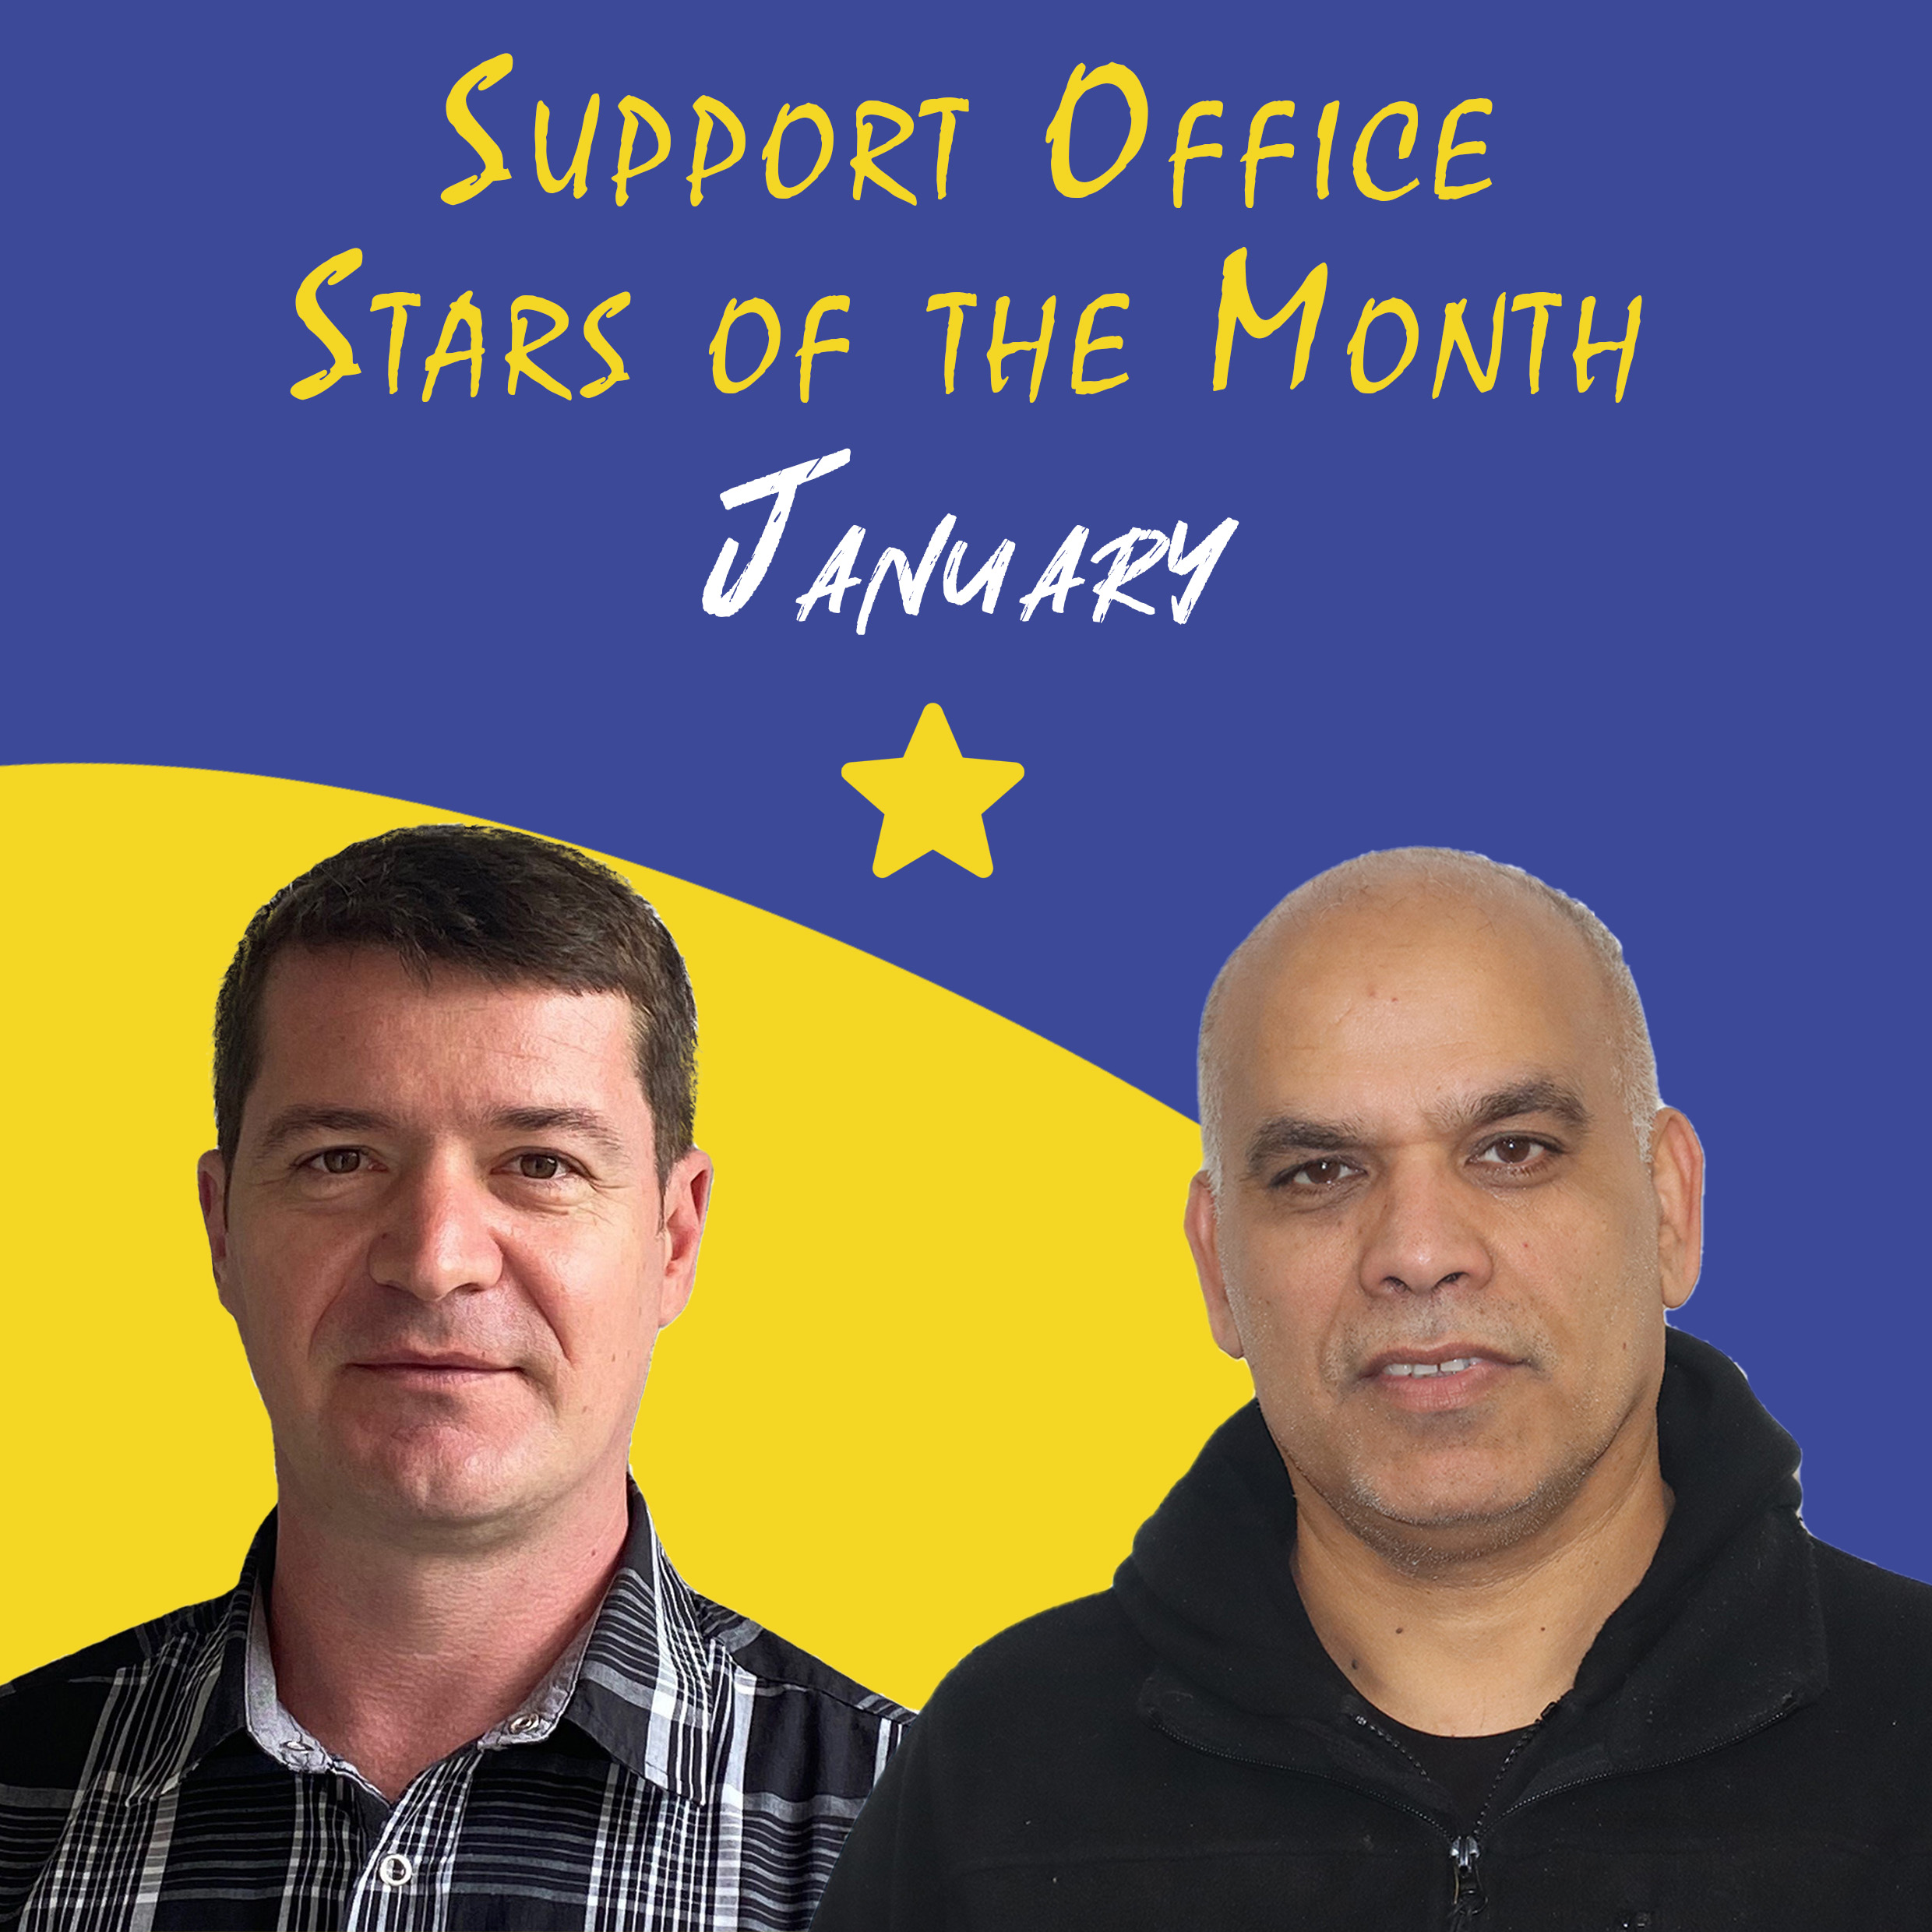 Support Office Stars of the Month - January.jpg